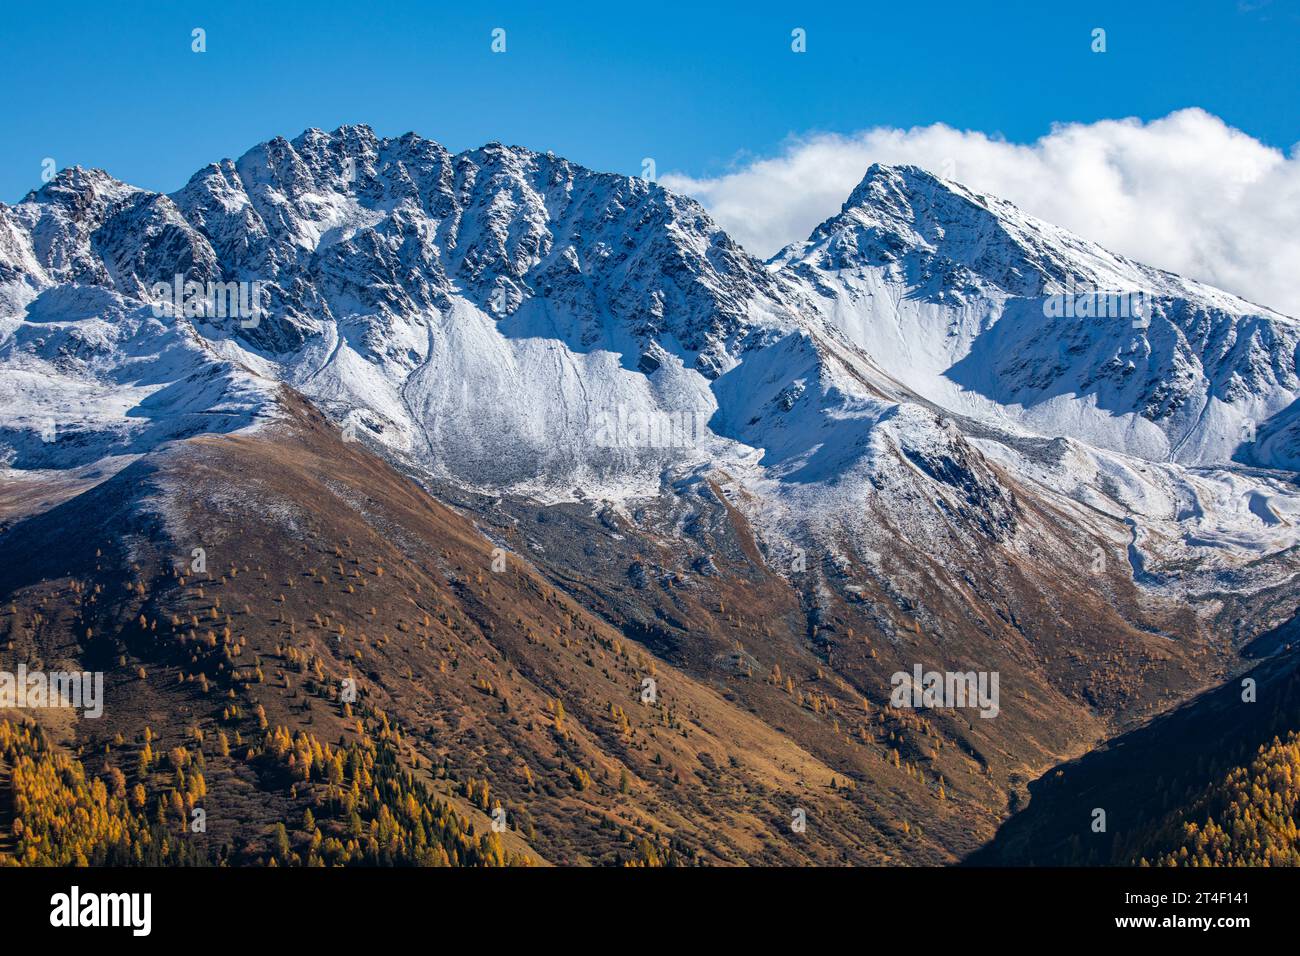 Amazing view over snow covered mountains with first snow in October. Near Davos, Switzerland Stock Photo